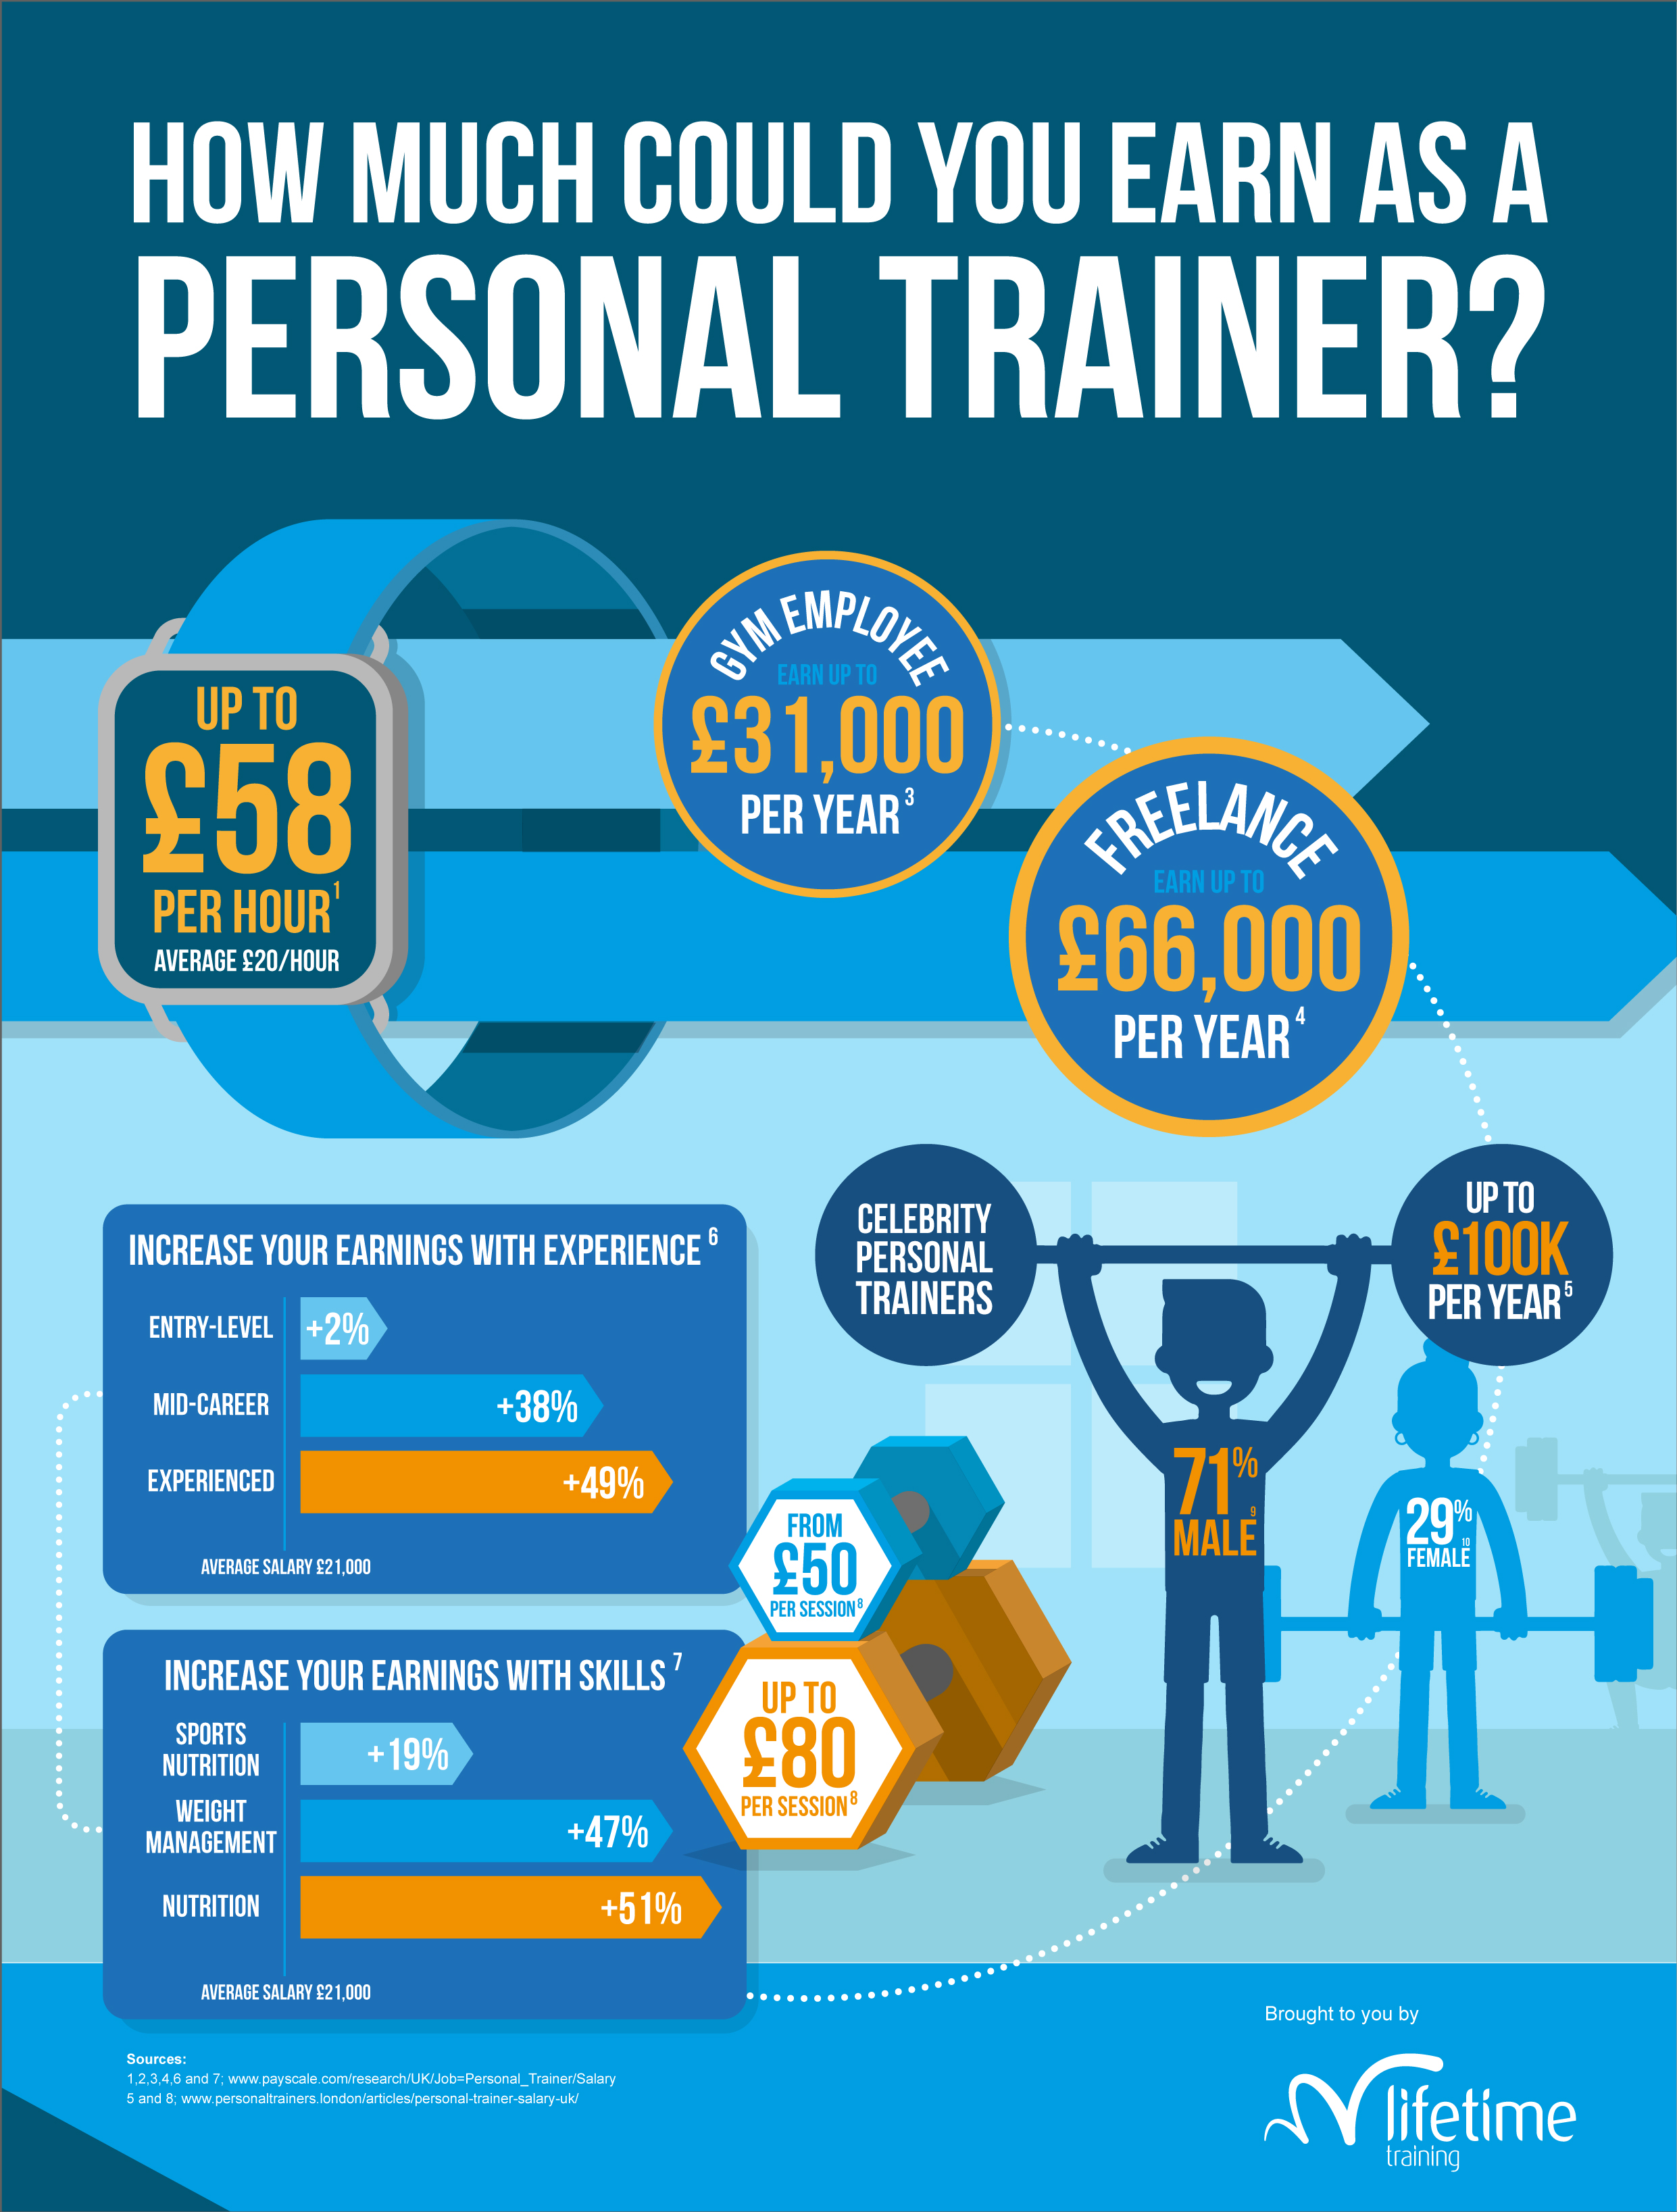 How Much Could You Earn as a Personal Trainer? – Infographic